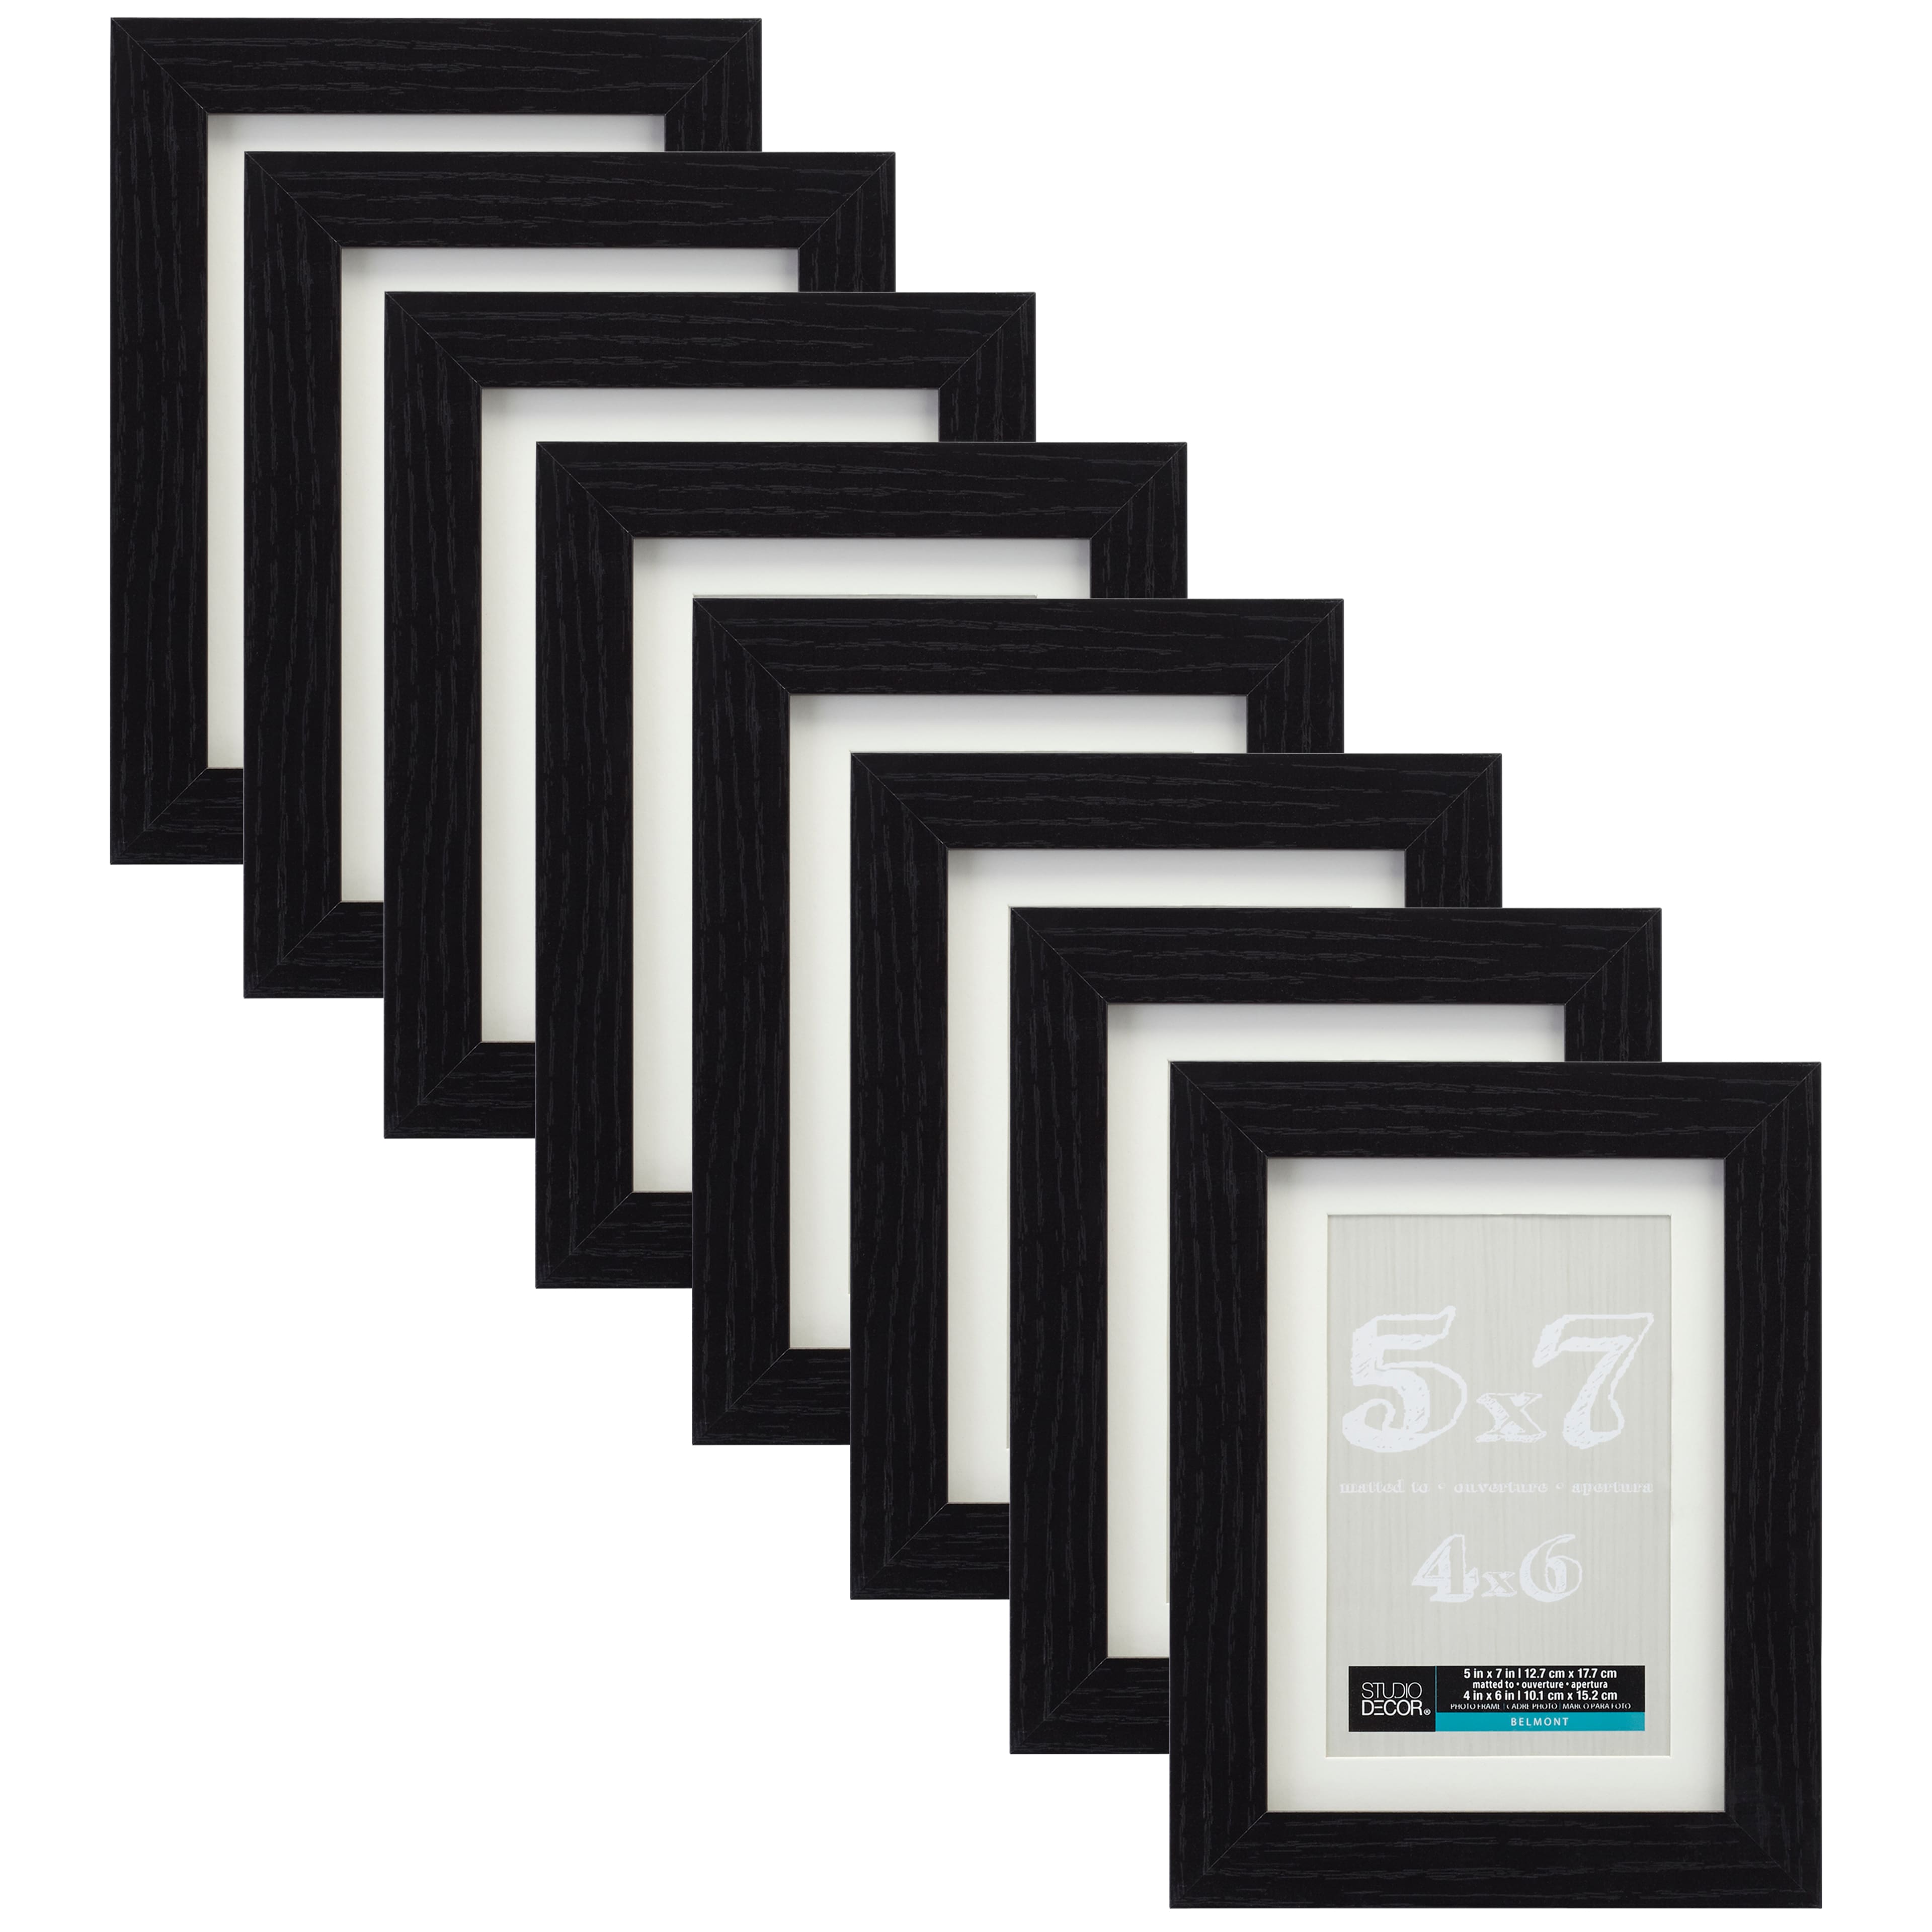 Icon Wood 4x6 Black Picture Frame + Reviews